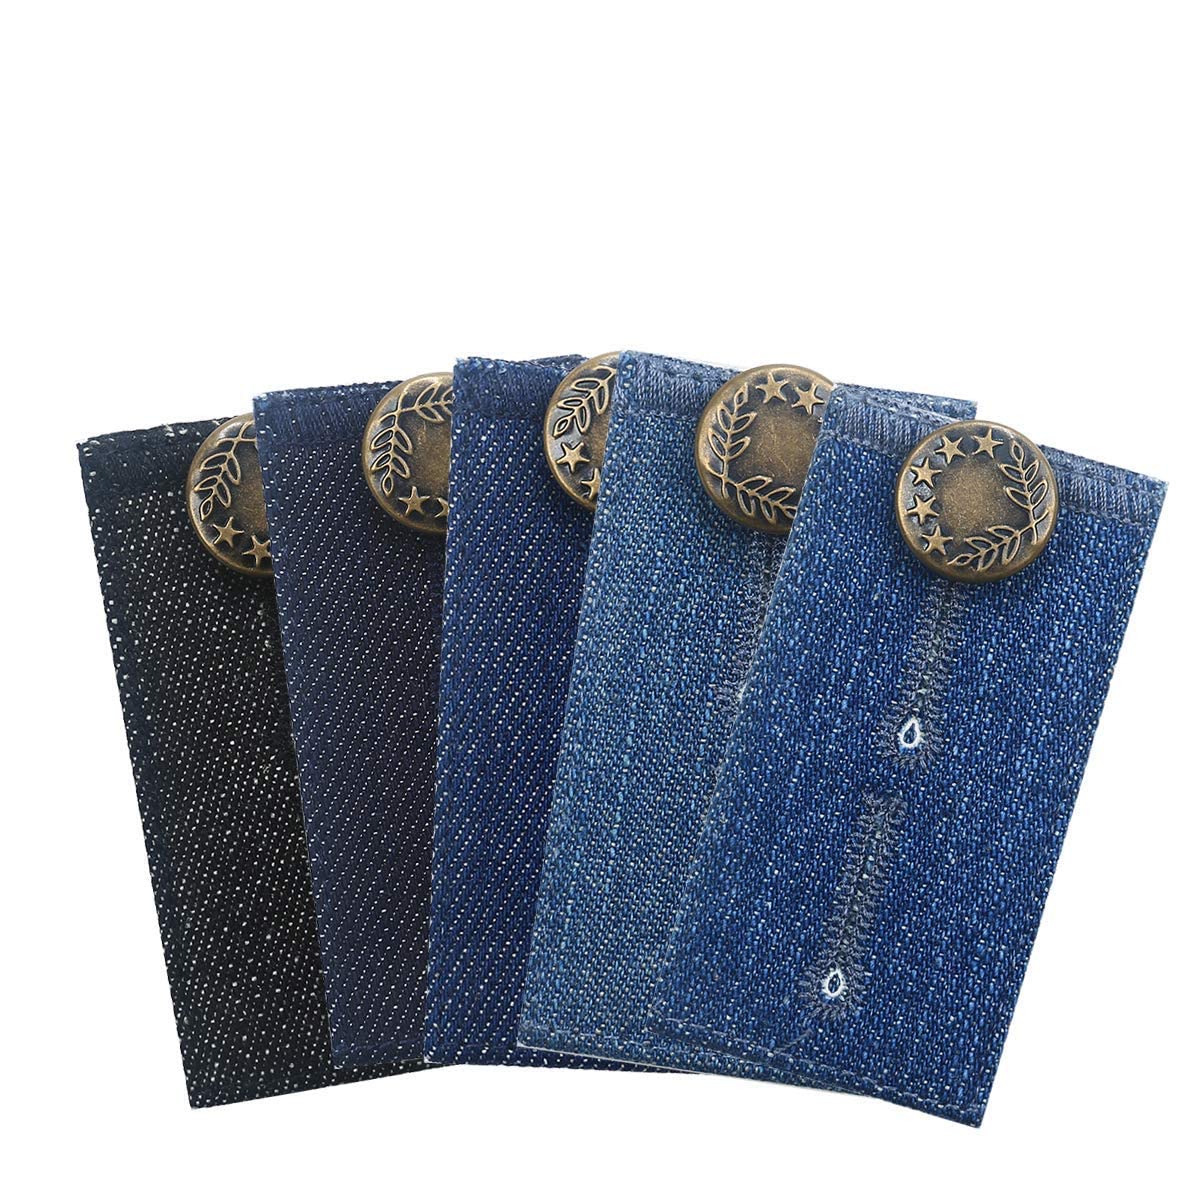 Johnson & Smith Waistband Extenders Button Extender for Pants, Denim  Material, Pack of 5 Shades, Premium Metal Buttons, 2 Button Holes